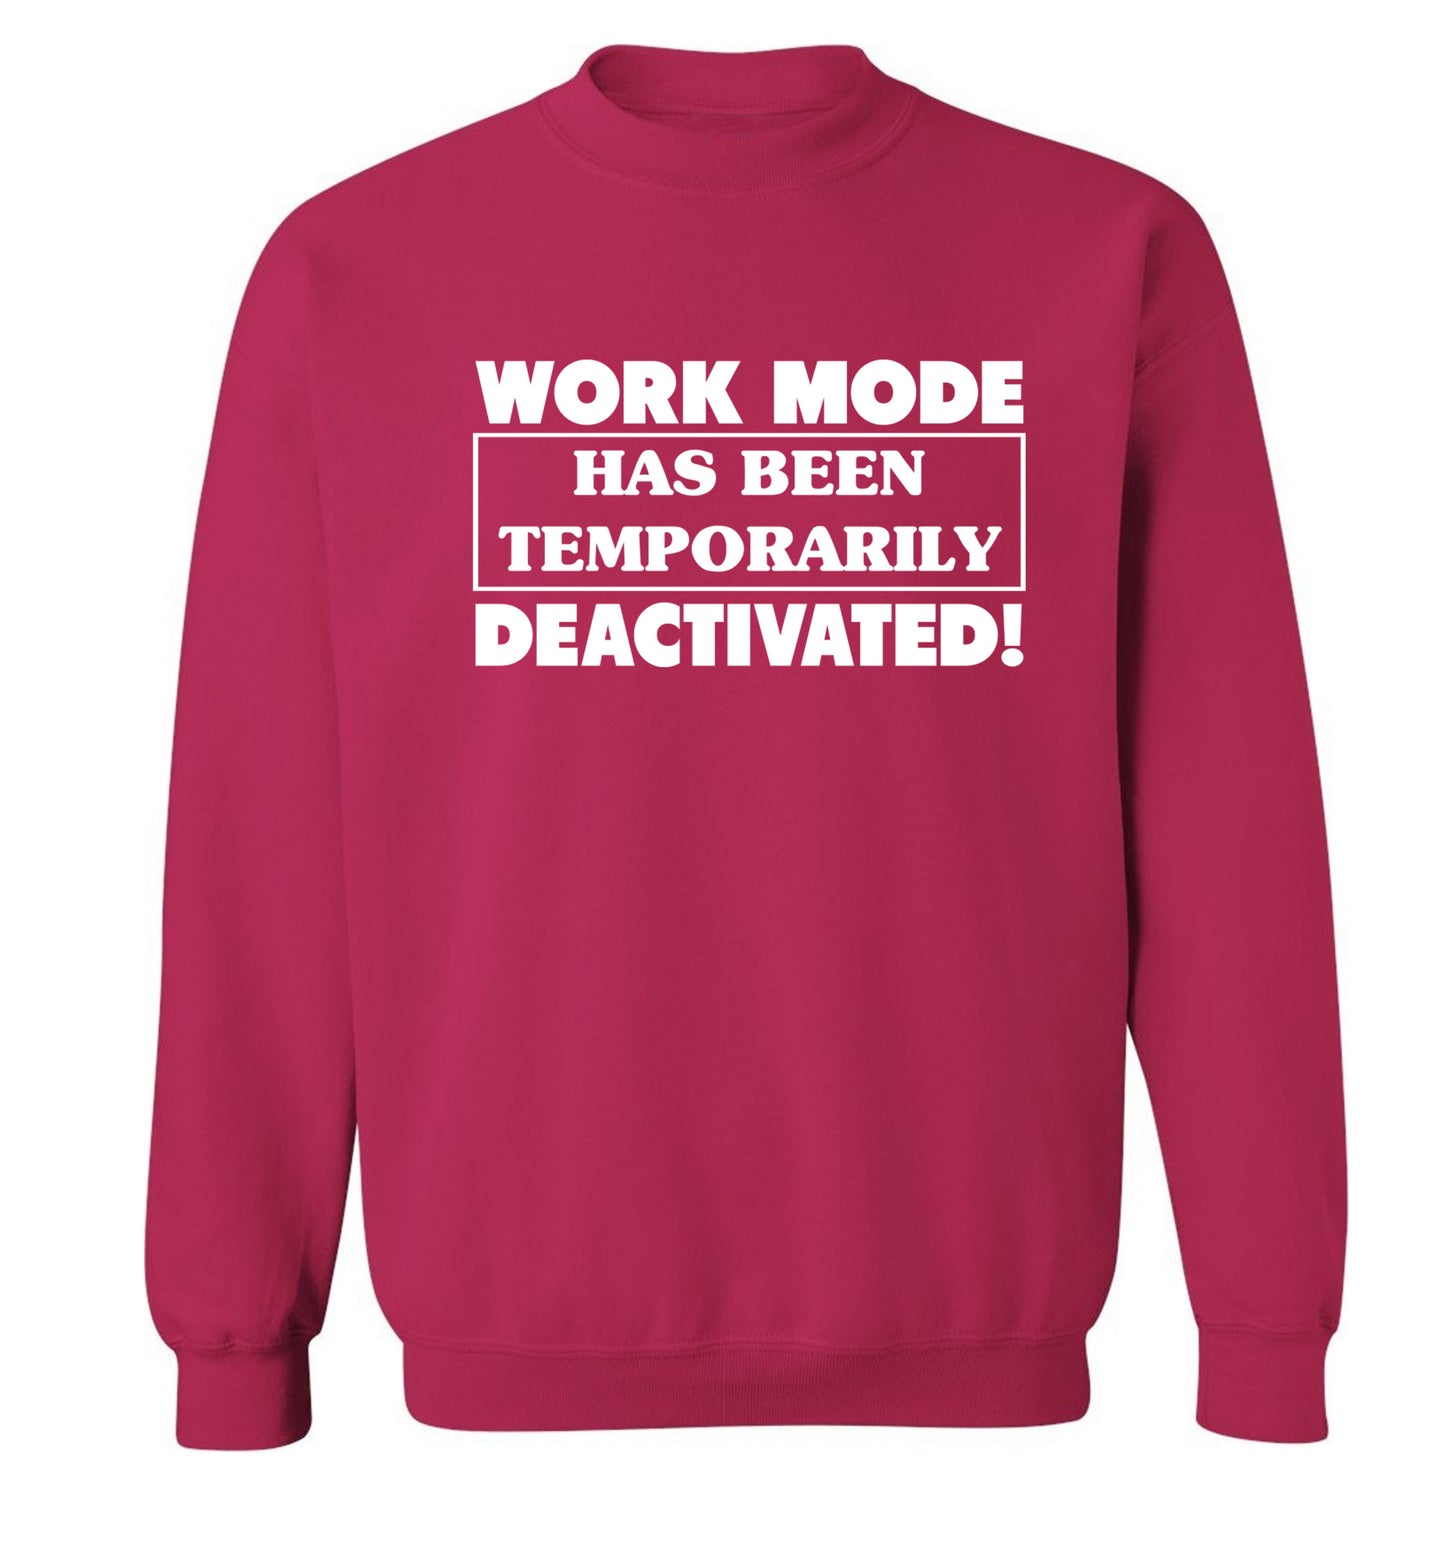 Work mode has now been temporarily deactivated Adult's unisex pink Sweater 2XL